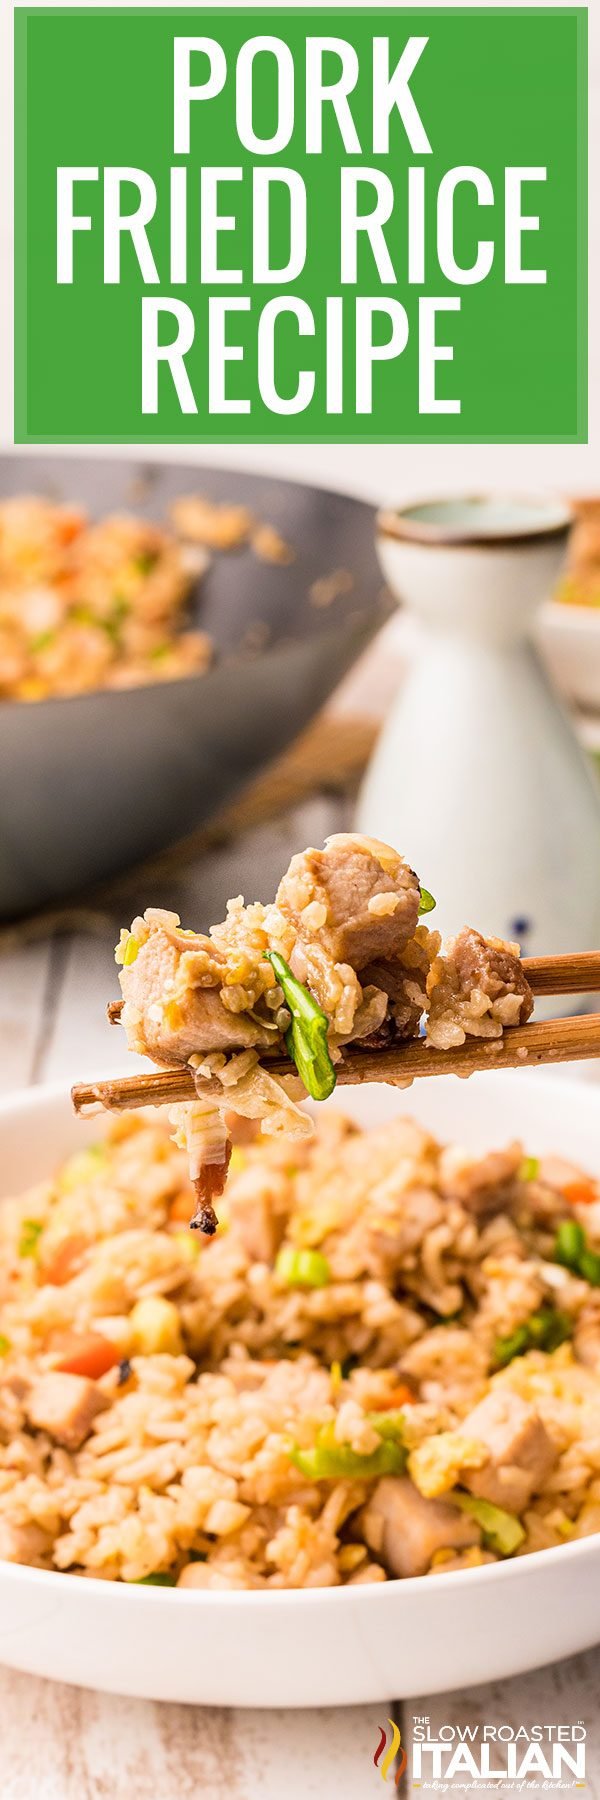 titled image (and shown): pork fried rice recipe